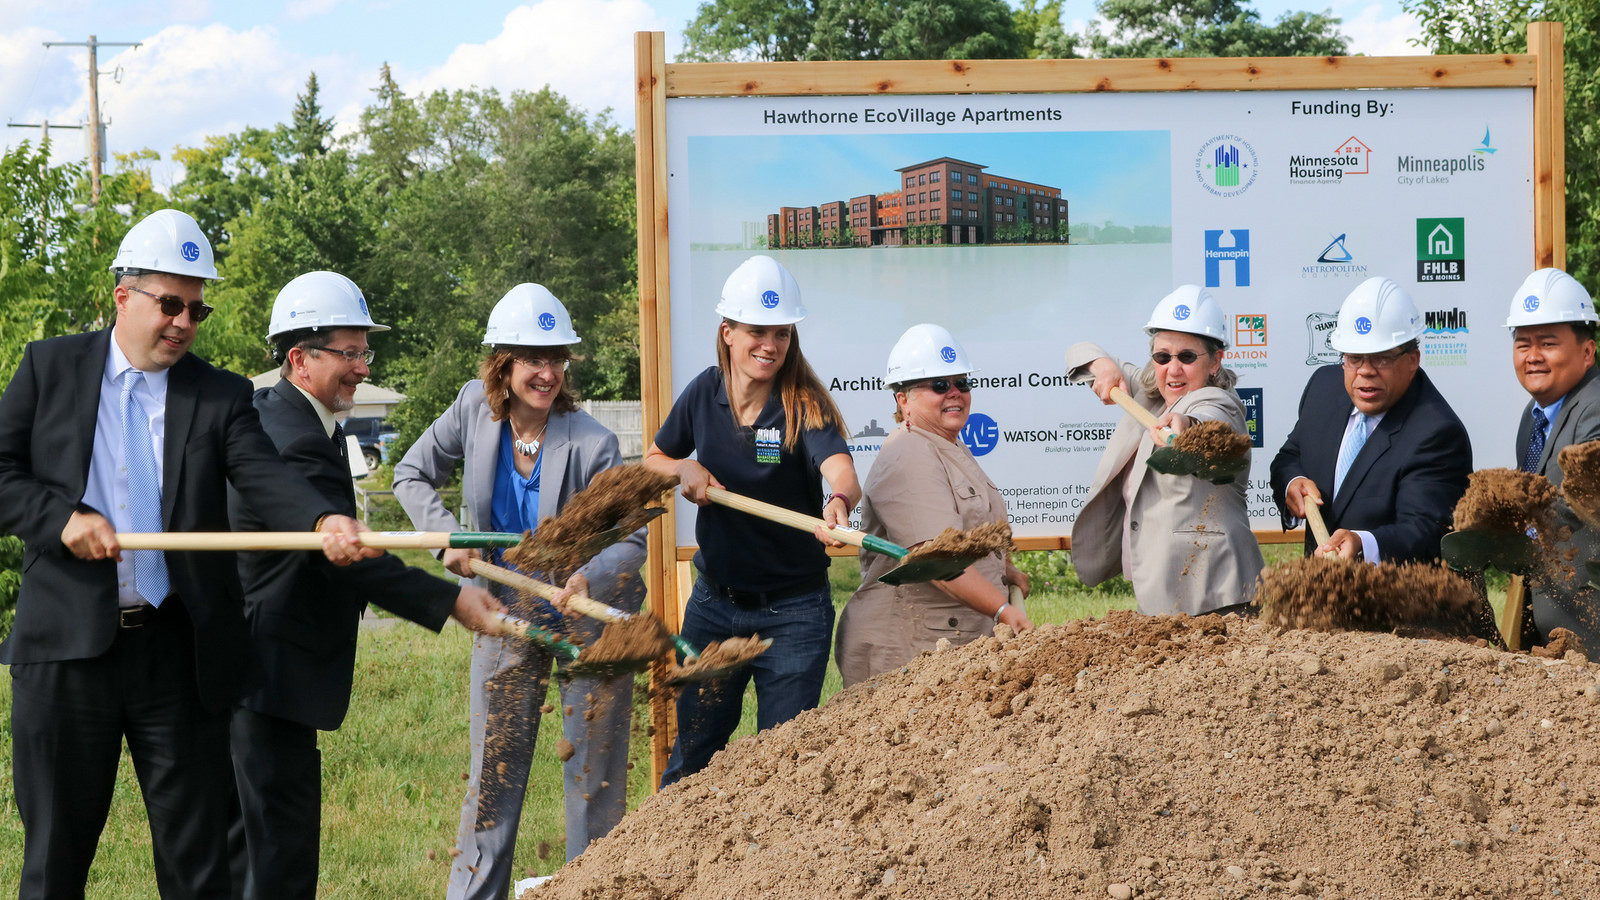 Project partners at the groundbreaking ceremony for EcoVillage Apartments, which was completed in 2017.